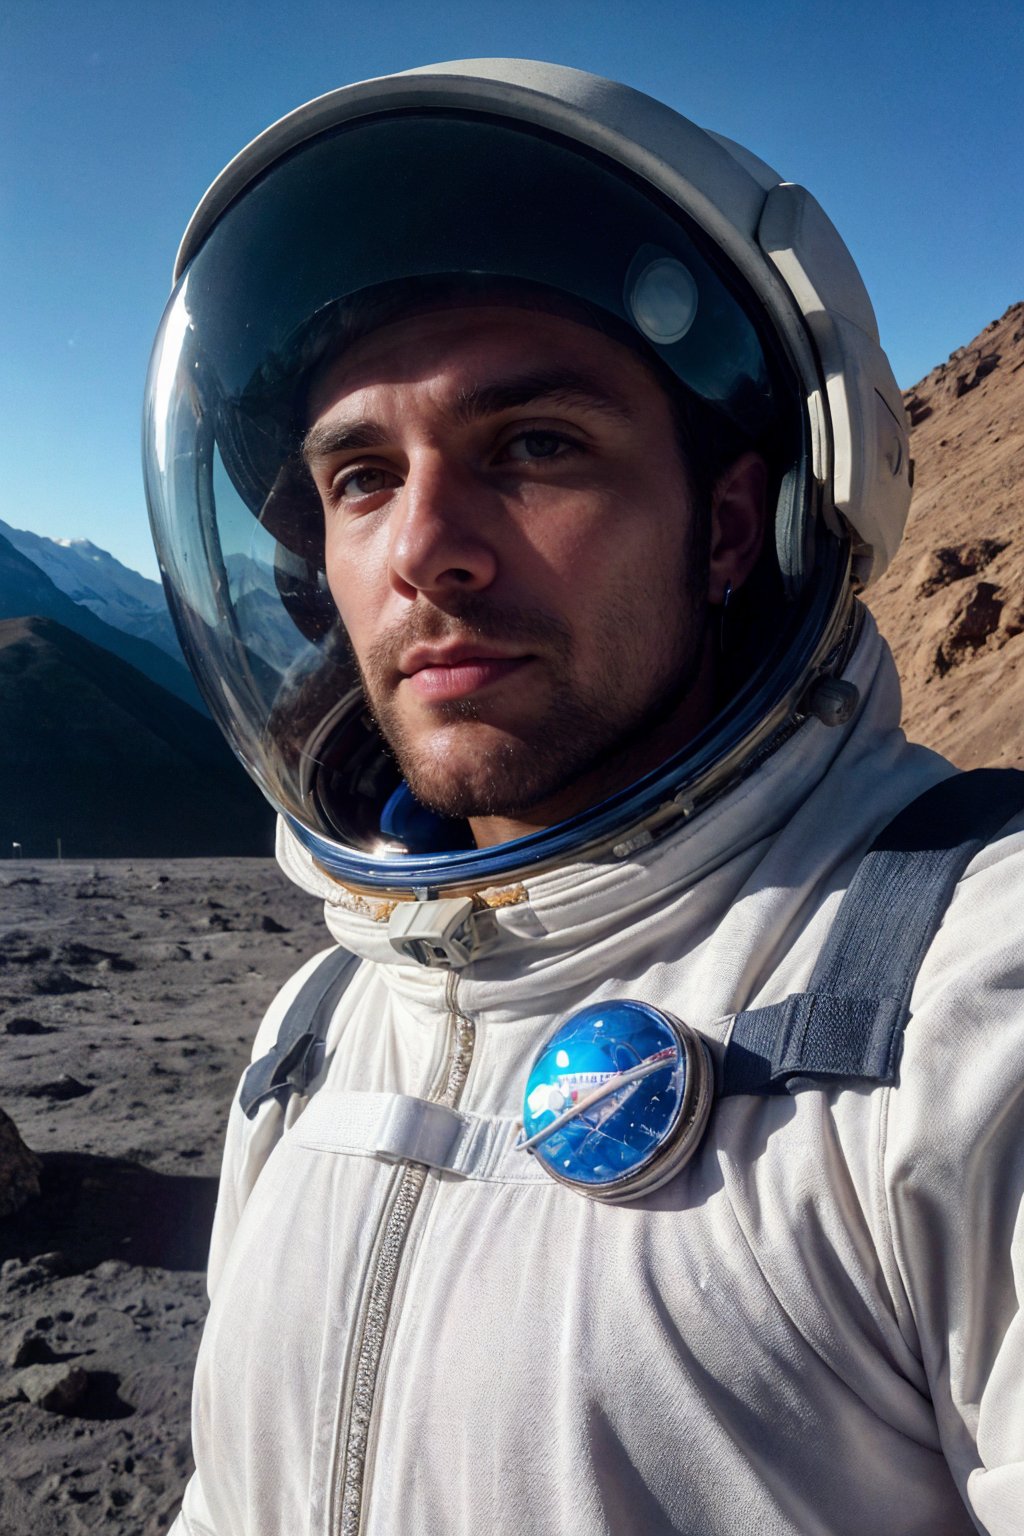 1boy, photo of a man wearing a transparent glass space helmet, beard, astronaut, wearing space bodysuit, hiking on the moon's surface, cyborg-like features evident, mountains in the lunar background, focused expression of experience visible through the helmet, high-quality photograph, professional and modern aesthetic, clean and polished with bright colors, detailed textures, (close-up), (large pectorals, puffy nipples), realistic, highly detailed, realistic eyes, intricate details, detailed background, depth of field